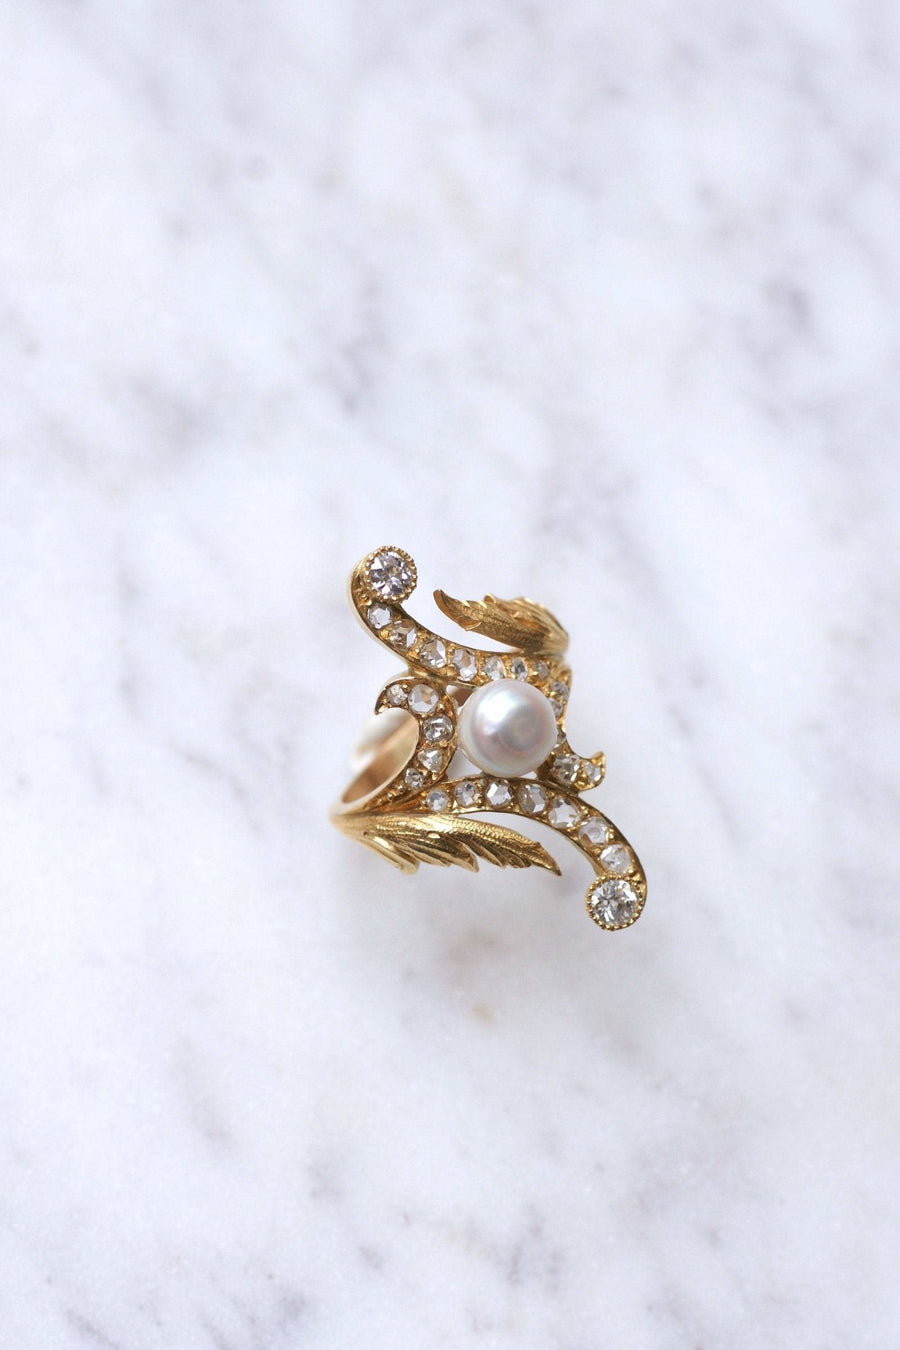 Marquise Art Nouveau style ring in 14Kt gold, diamonds, pearl - Galerie Pénélope